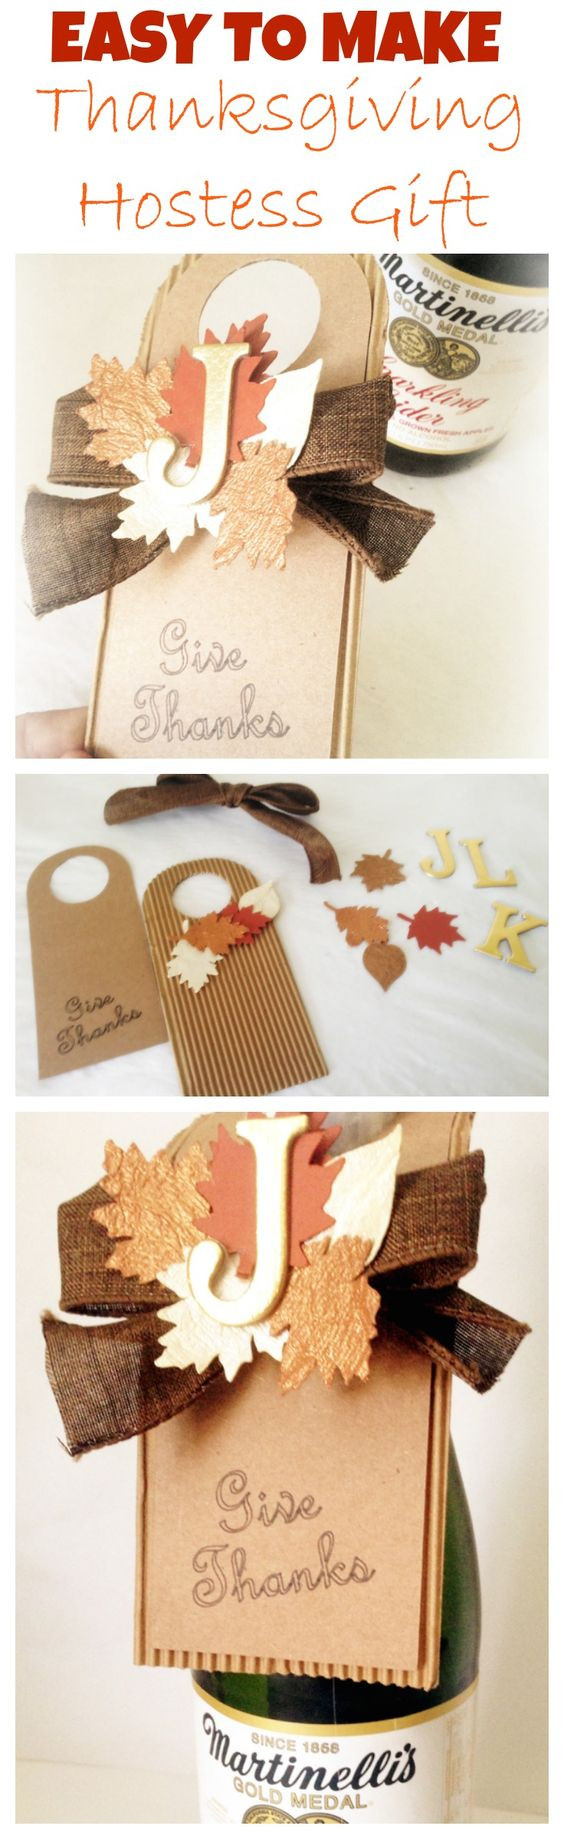 Thanksgiving Diy Gifts
 Thanksgiving Gifts and DIY and crafts on Pinterest